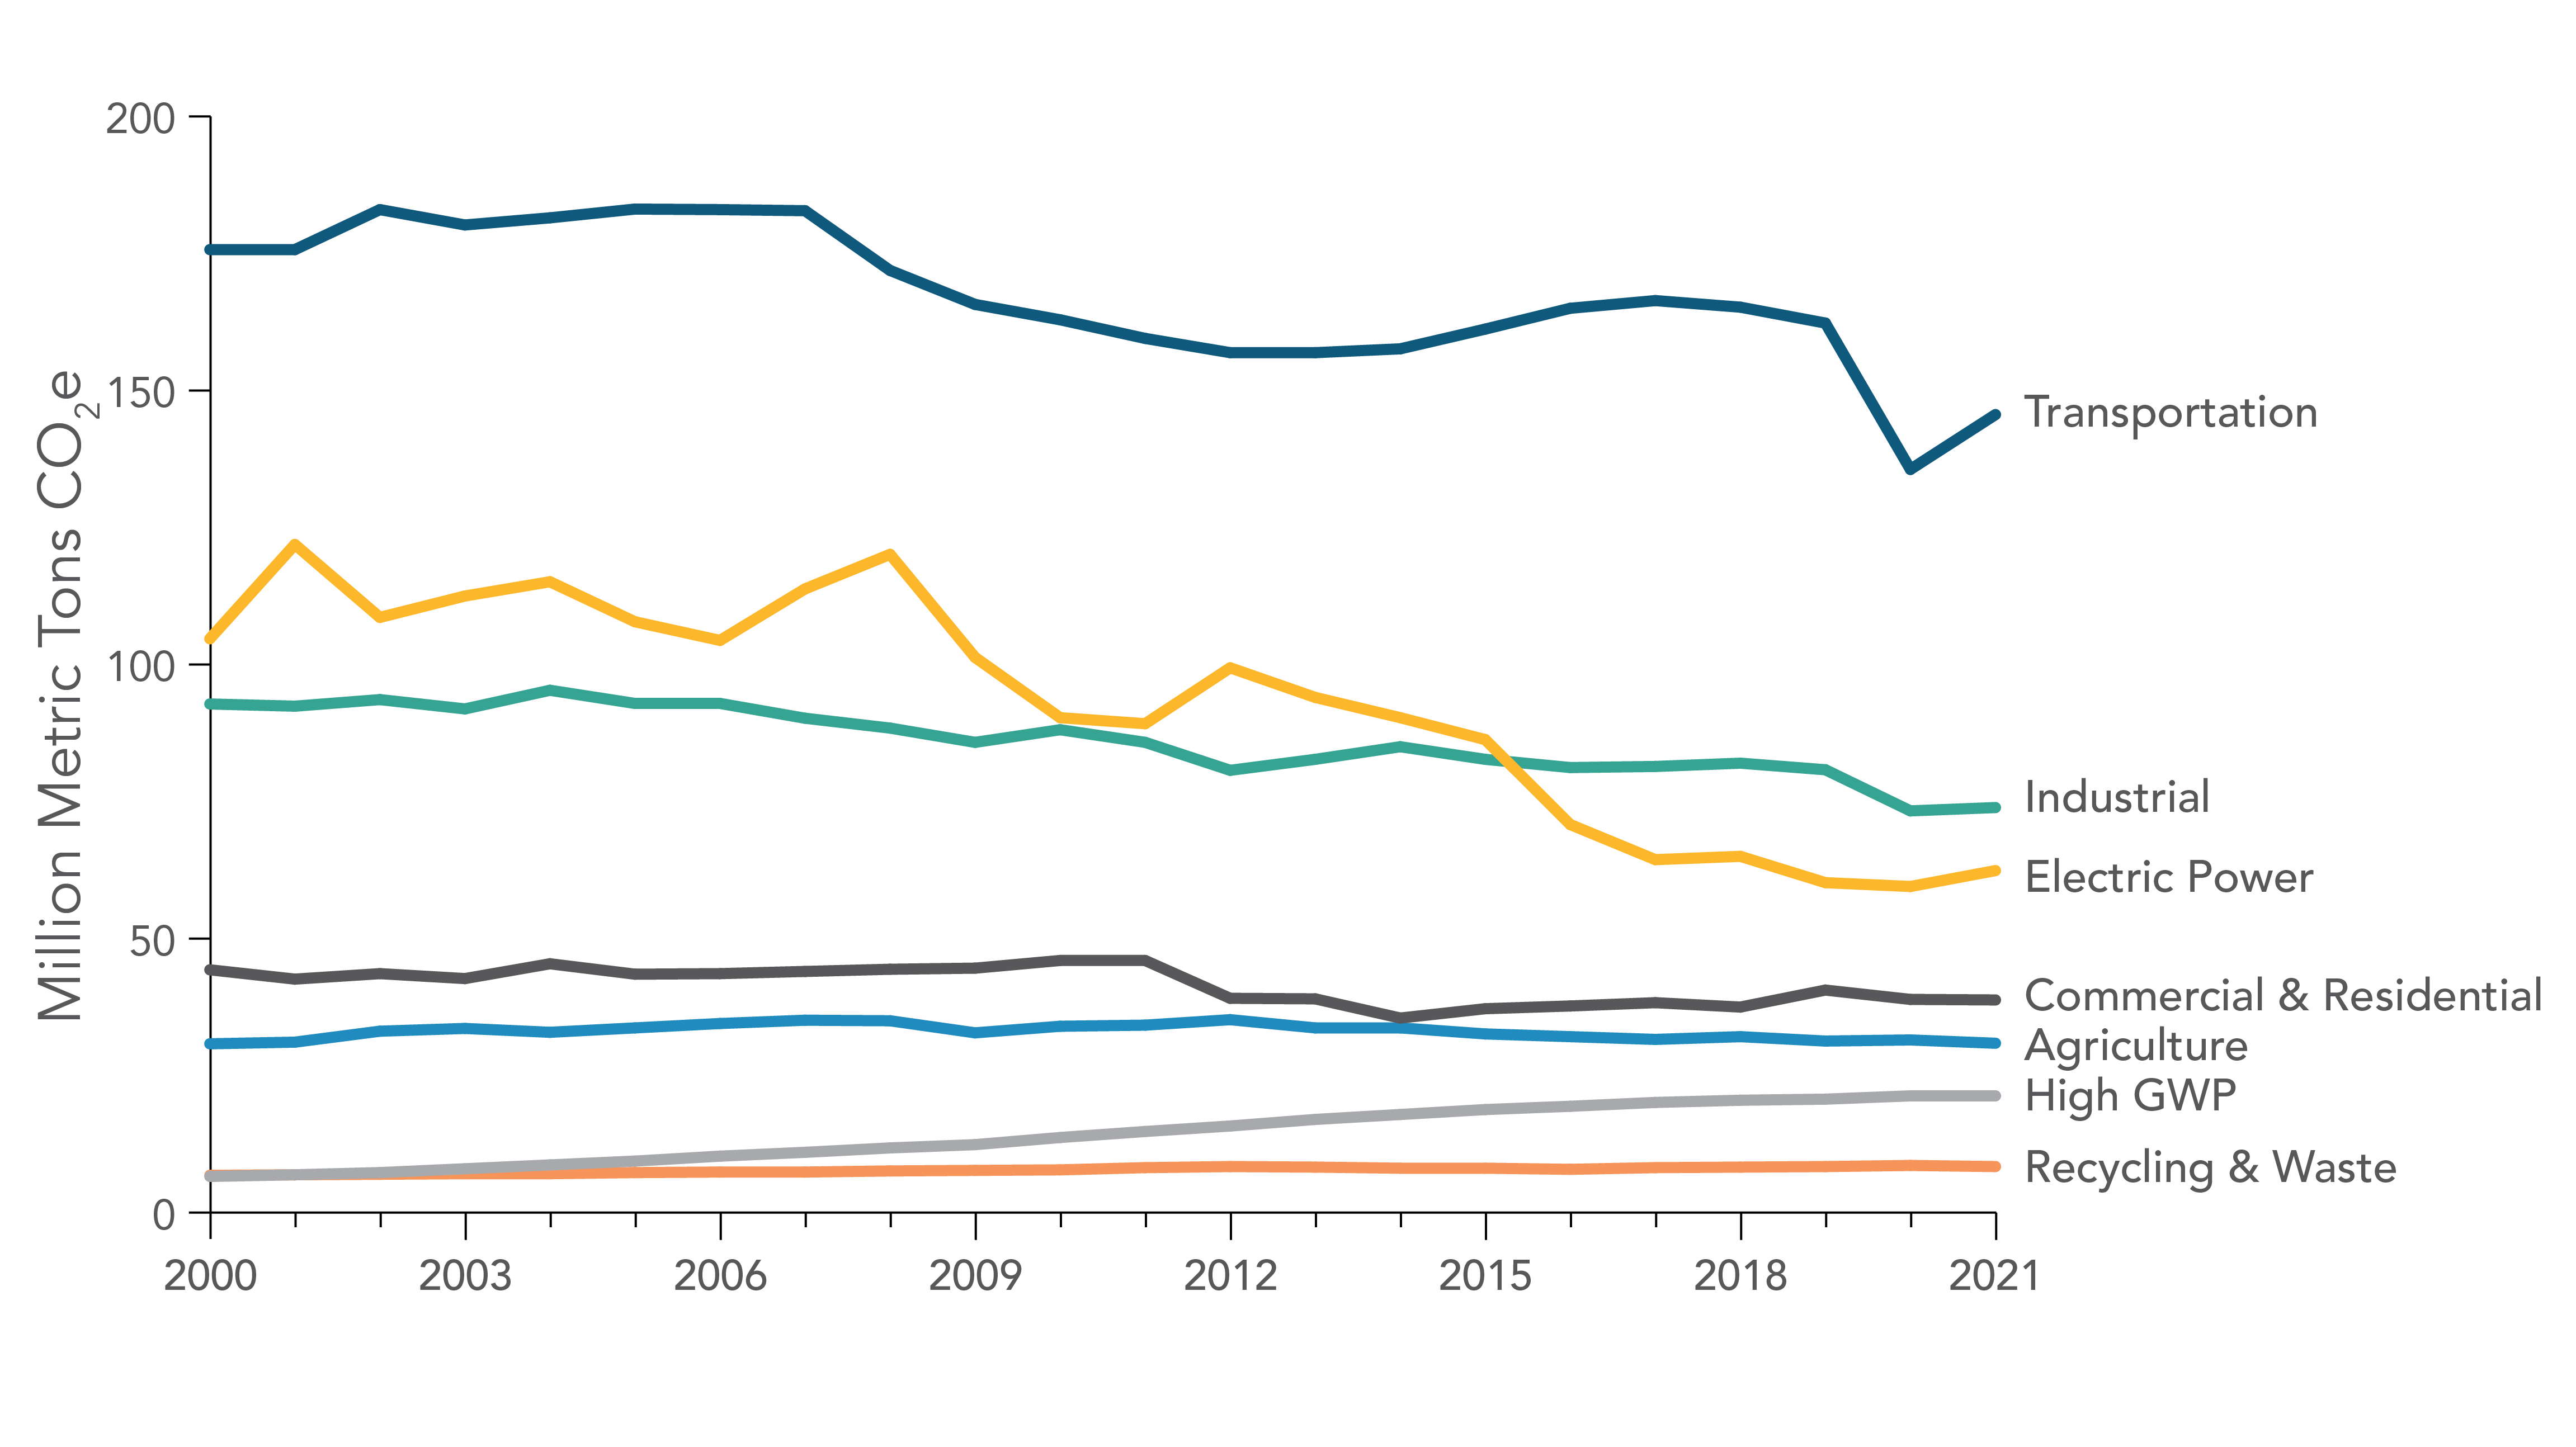 A line graph showing emissions trends by Scoping Plan sector from 2000 to 2021. Sectors are represented by the following lines: Transportation, Electric Power, Industrial, Commercial & Residential, Agriculture, High GWP, and Recycling & Waste. The transportation sector is the largest source of GHG emissions in the state in all years. The industrial sector is the next largest sector in 2021, followed by electric power, Commercial & Residential, Agriculture, High GWP, and finally Recycling & Waste, in descending order. Emissions from most sectors have decreased or stayed about the same over time. For more information on data displayed, contact ghginventory@arb.ca.gov.  